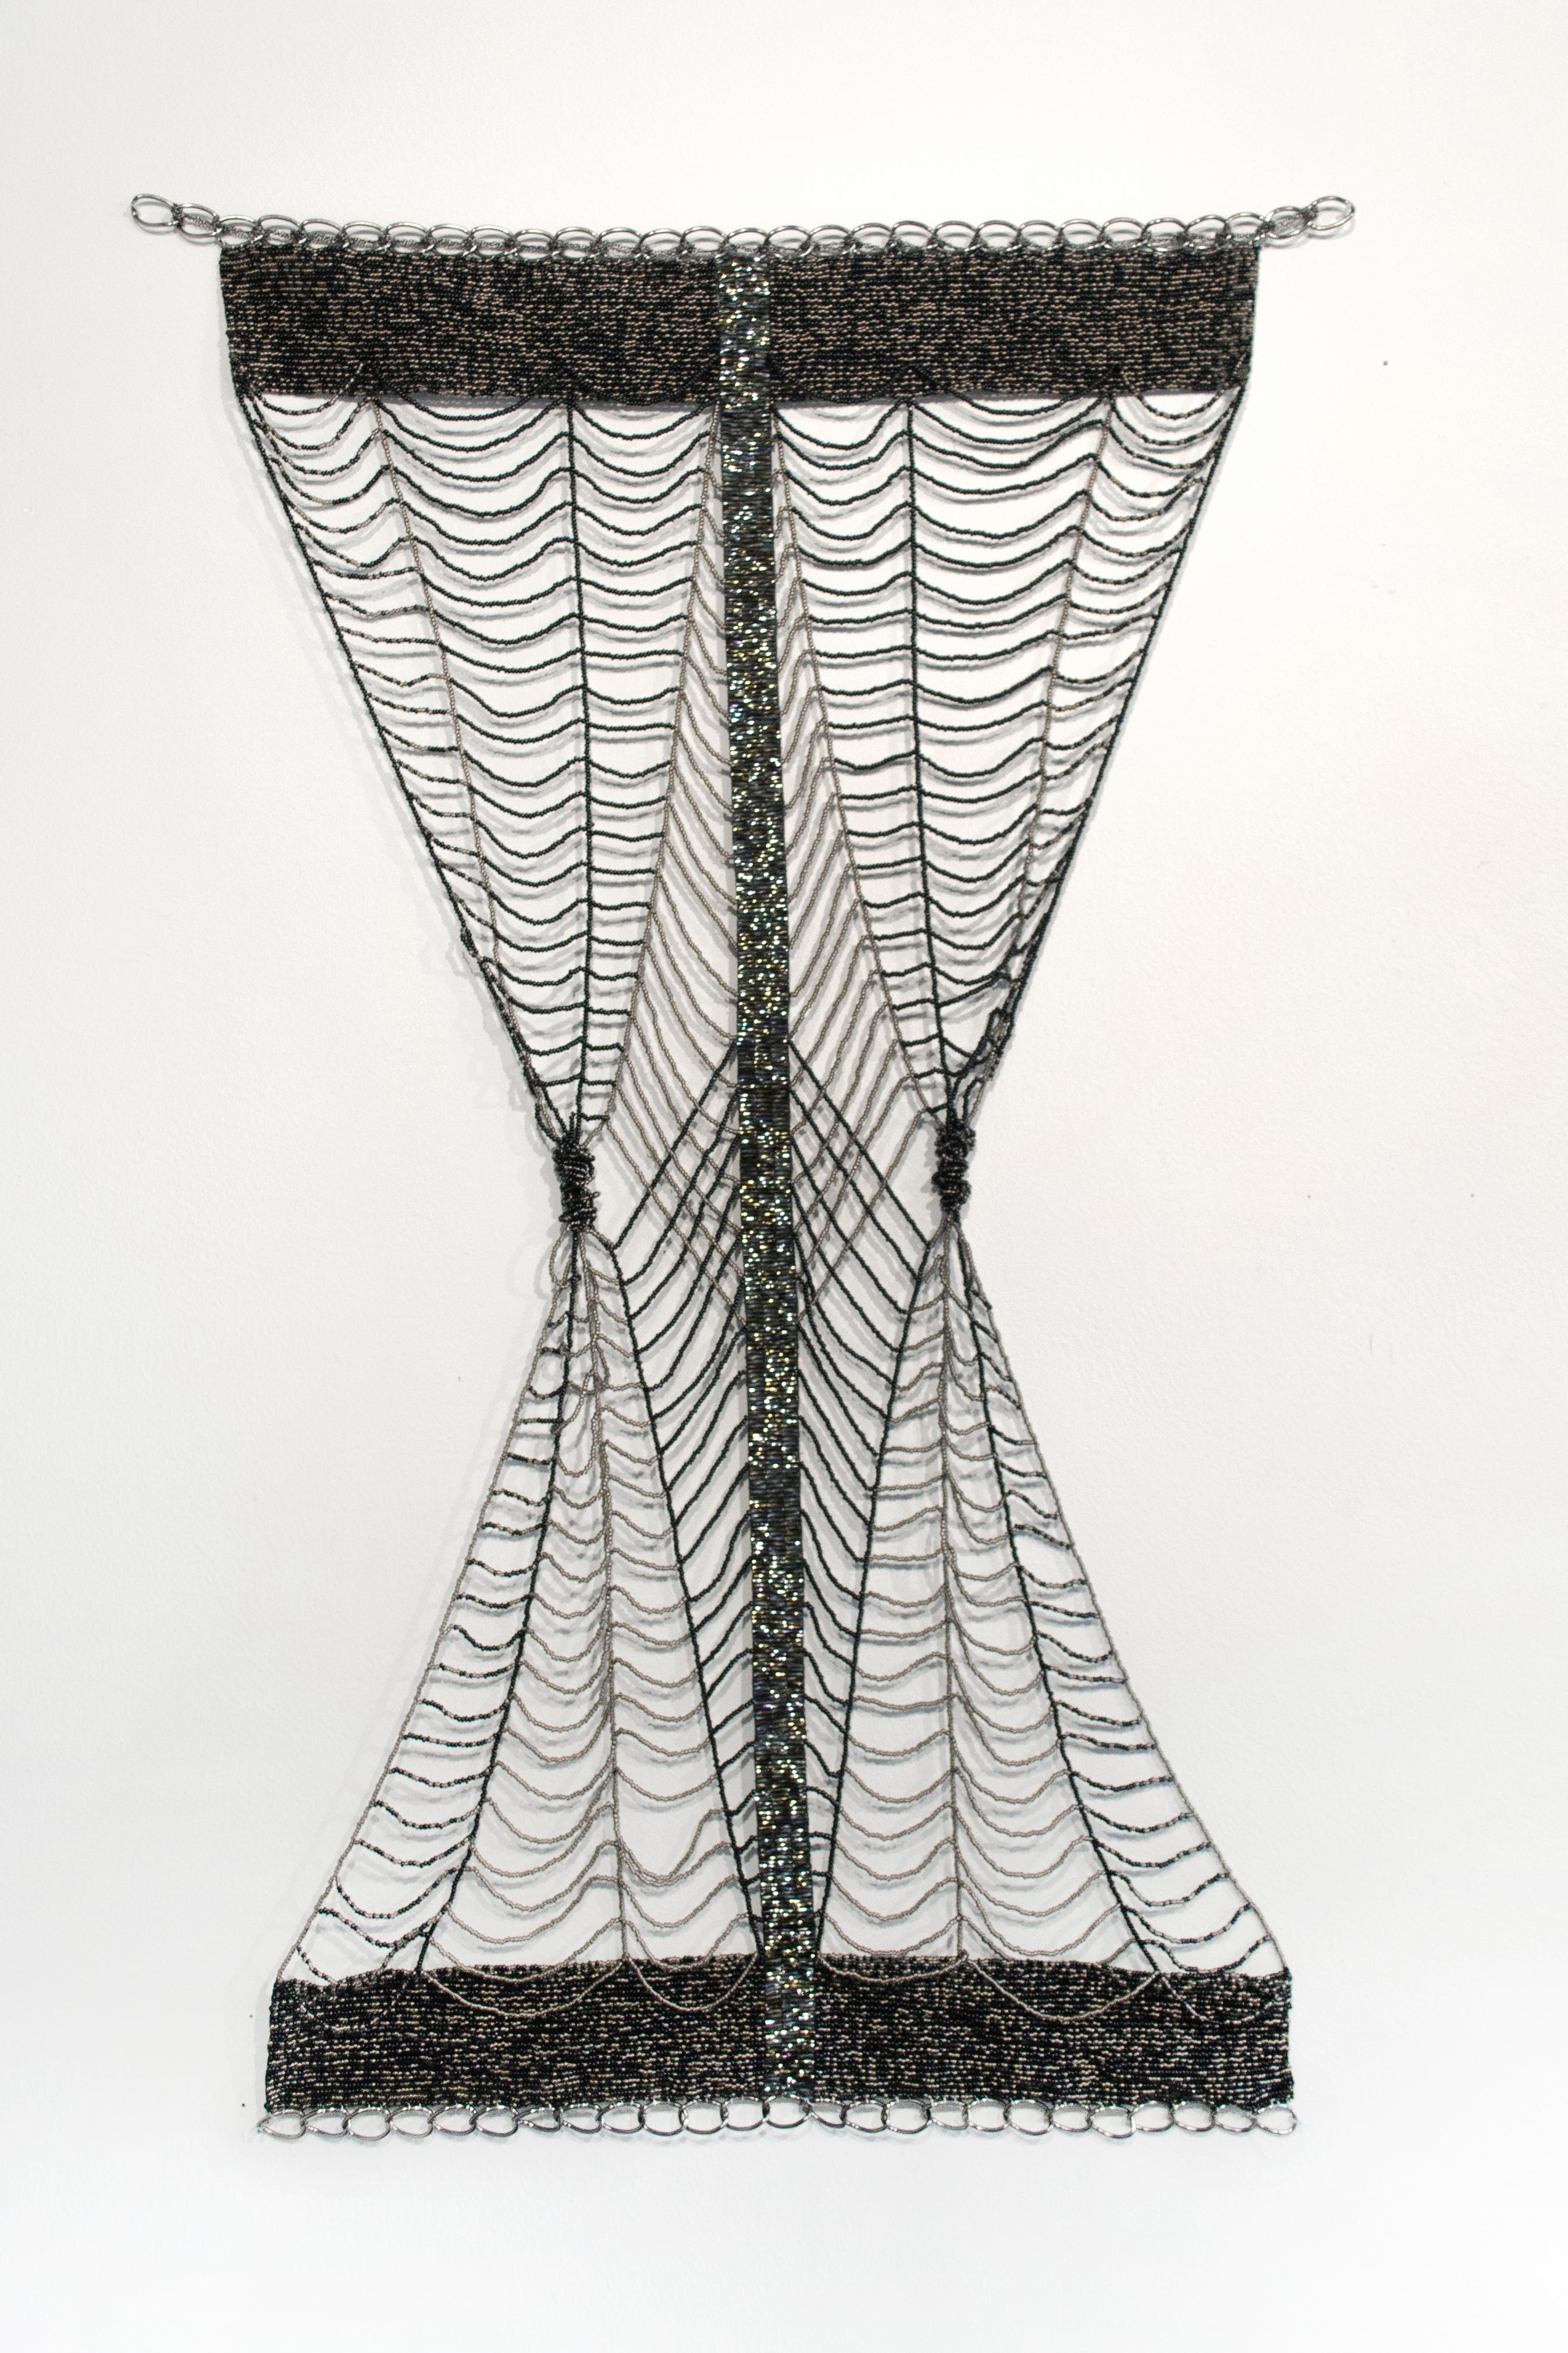 Kathryn Shriver Abstract Sculpture - Contact Tracing: The Slick Spine of Rumor